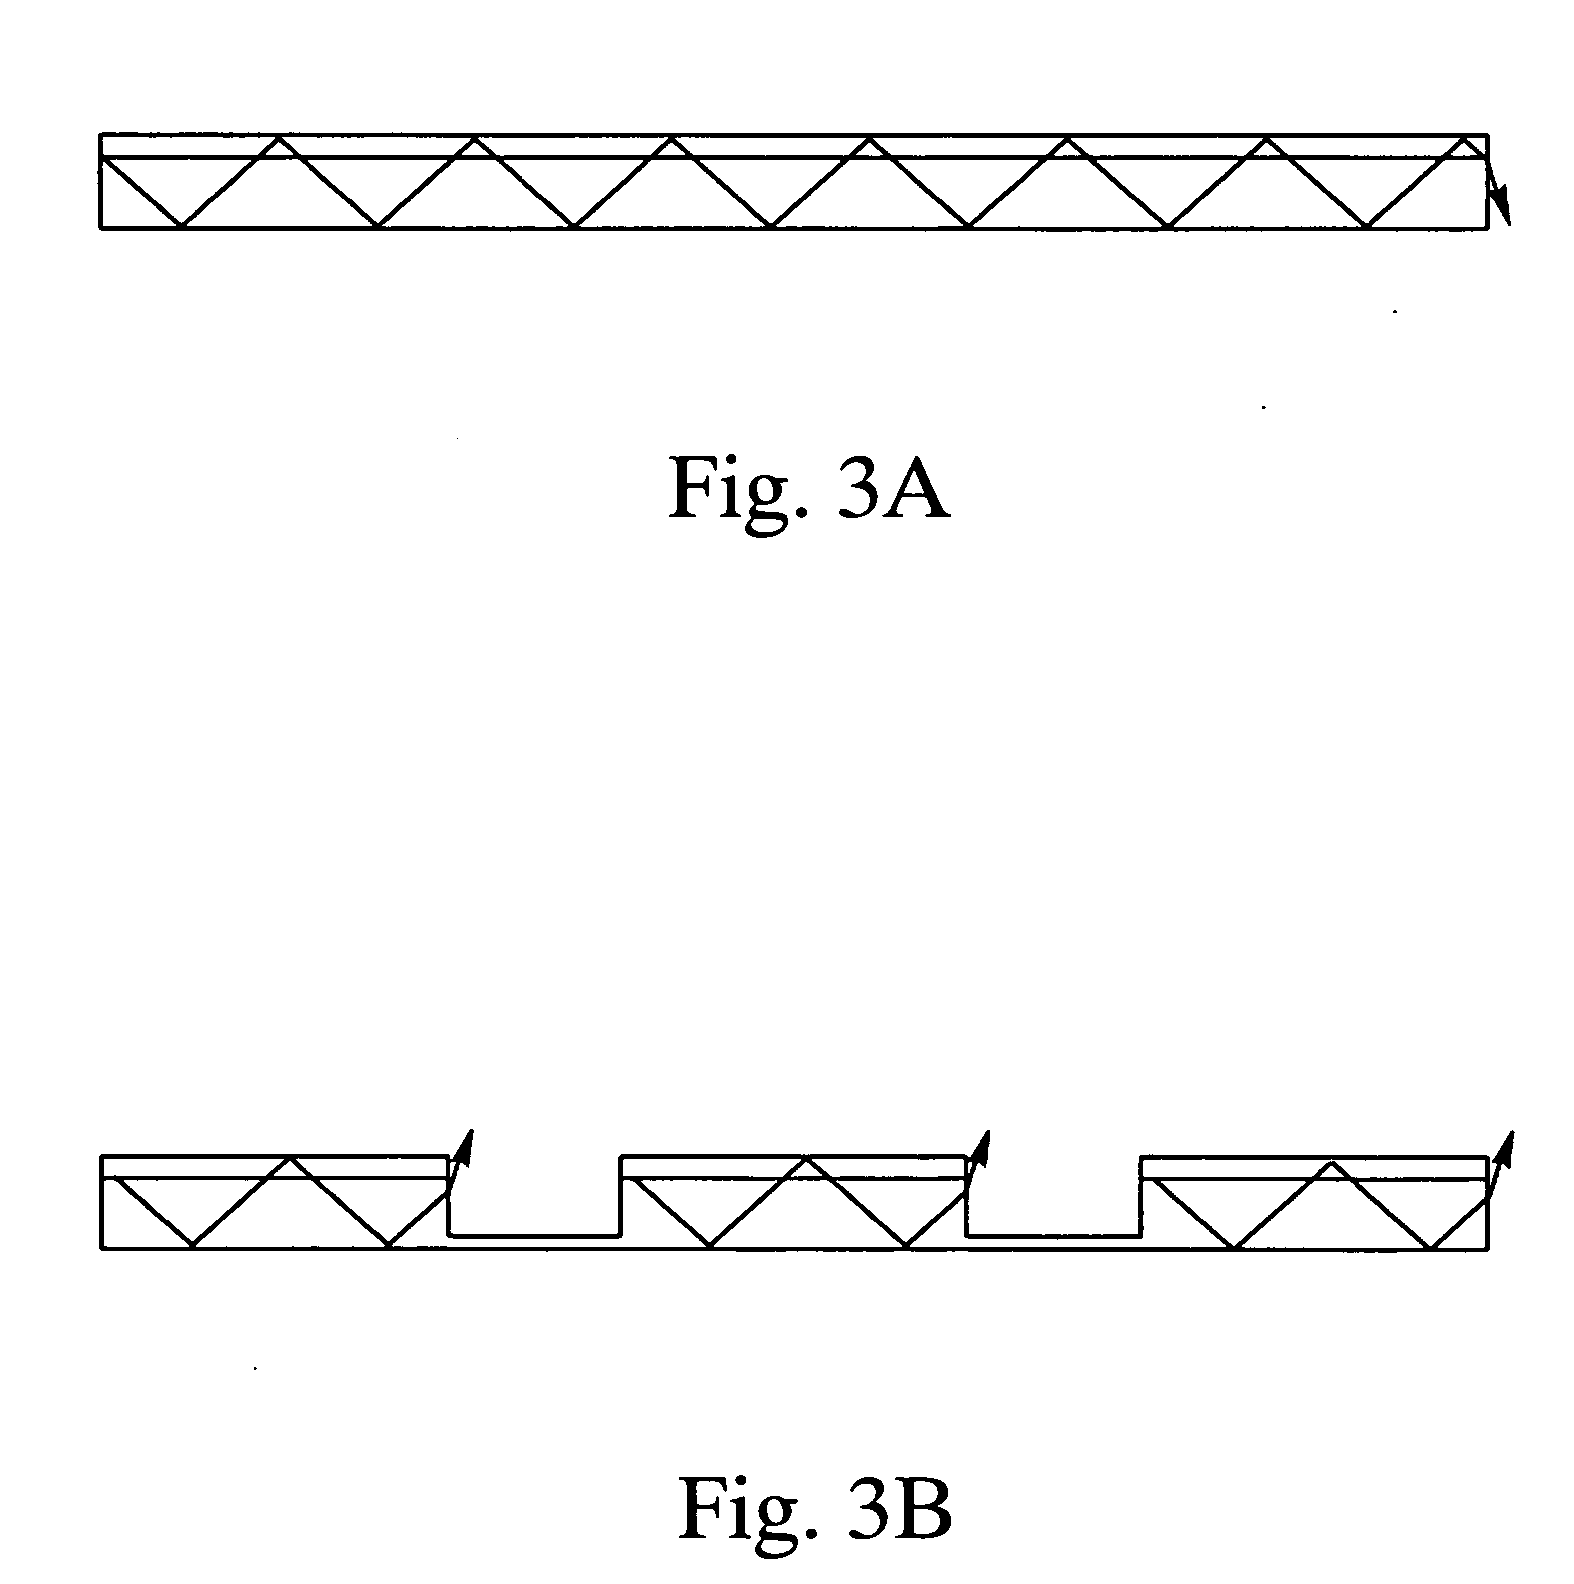 Large-sized light-emitting diodes with improved light extraction efficiency